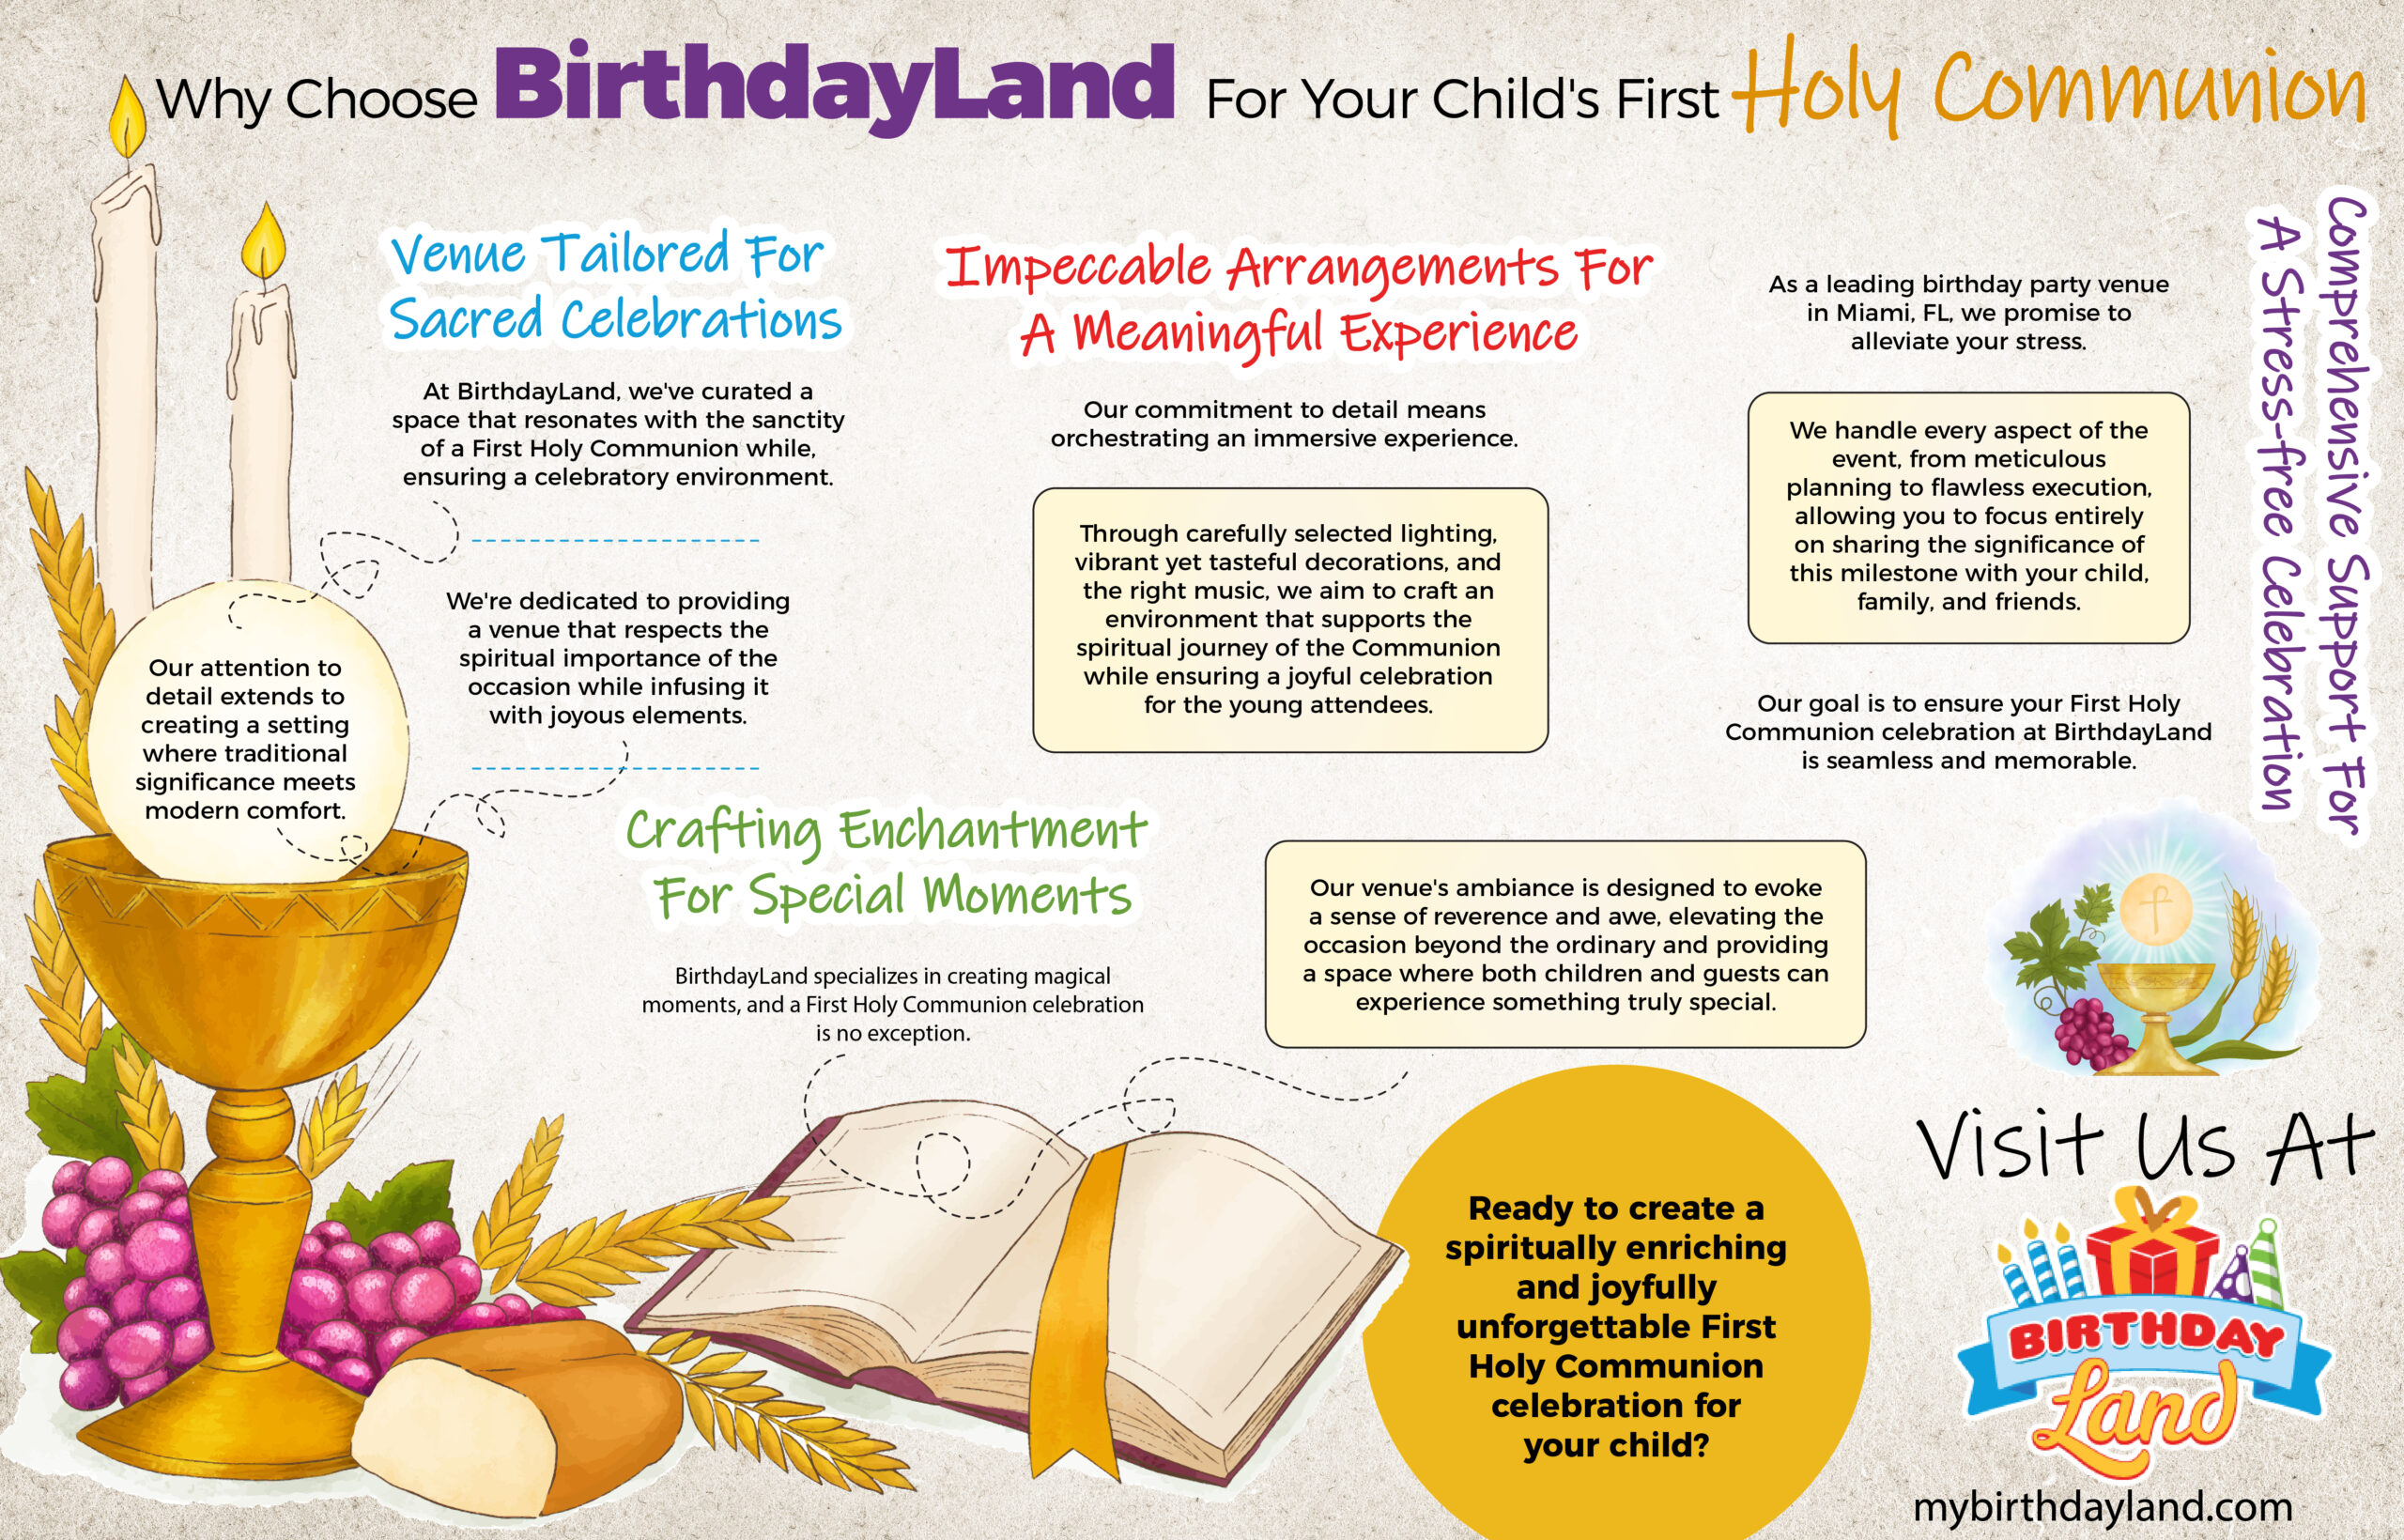 Why choose birthdayland for Child's first Holy Communion